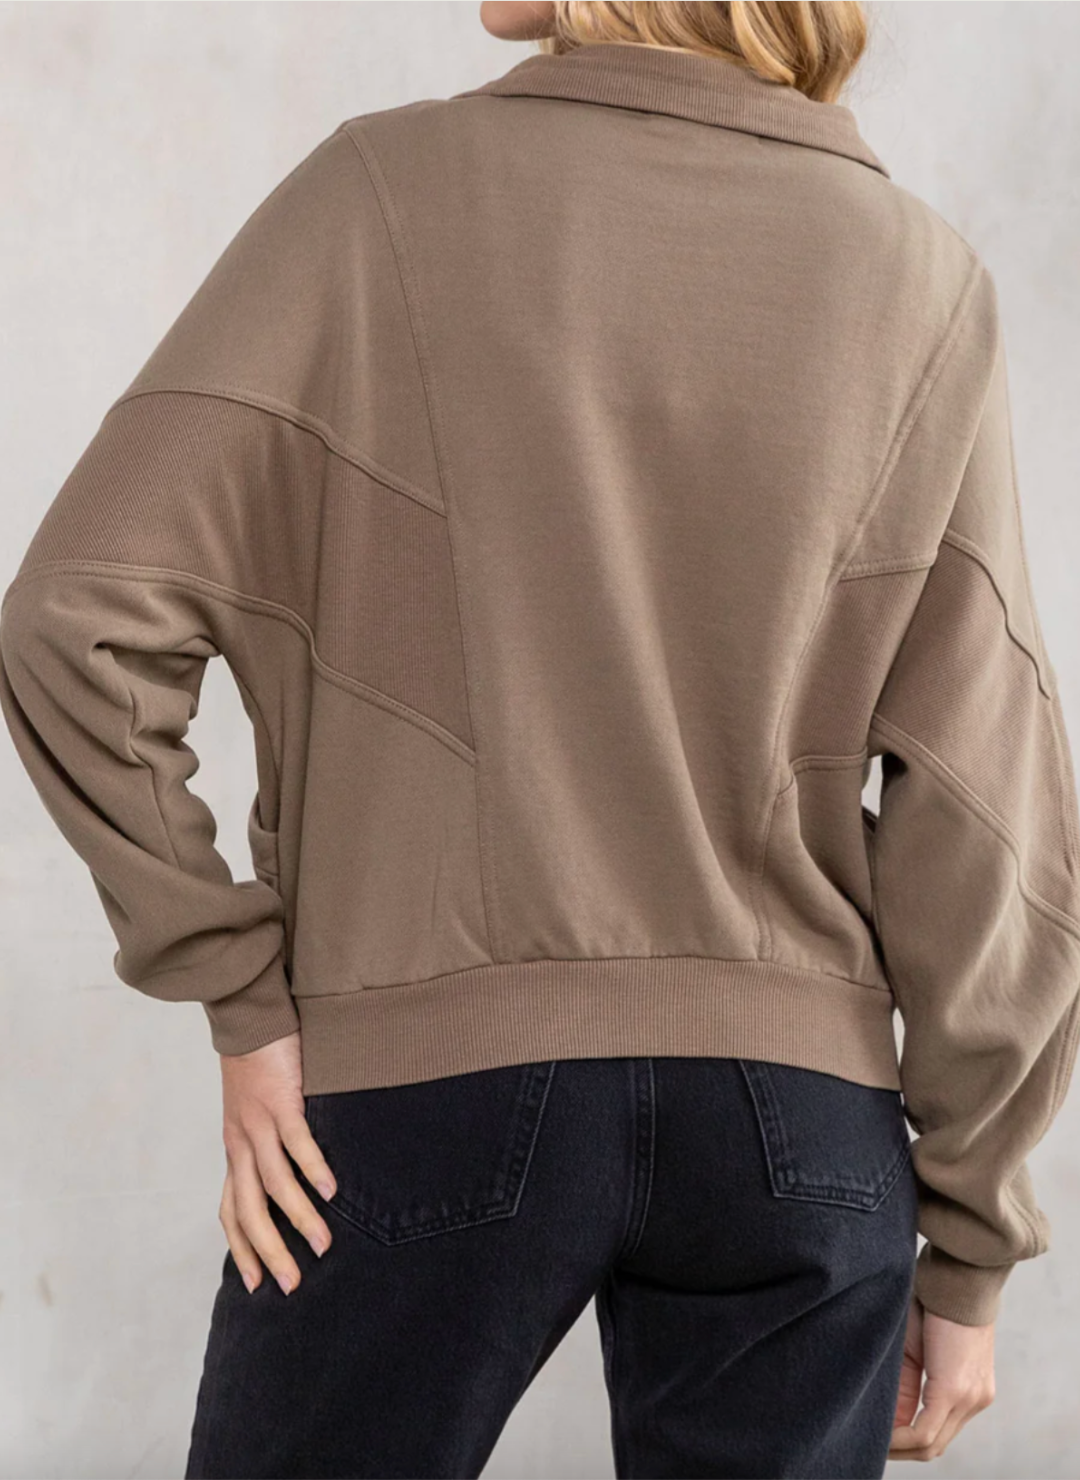 Back view of the model wearing the LS Vivian Vintage Wash Zip Ip Sweatshirt. Showing the pattern and different textures of the sweatshirt.